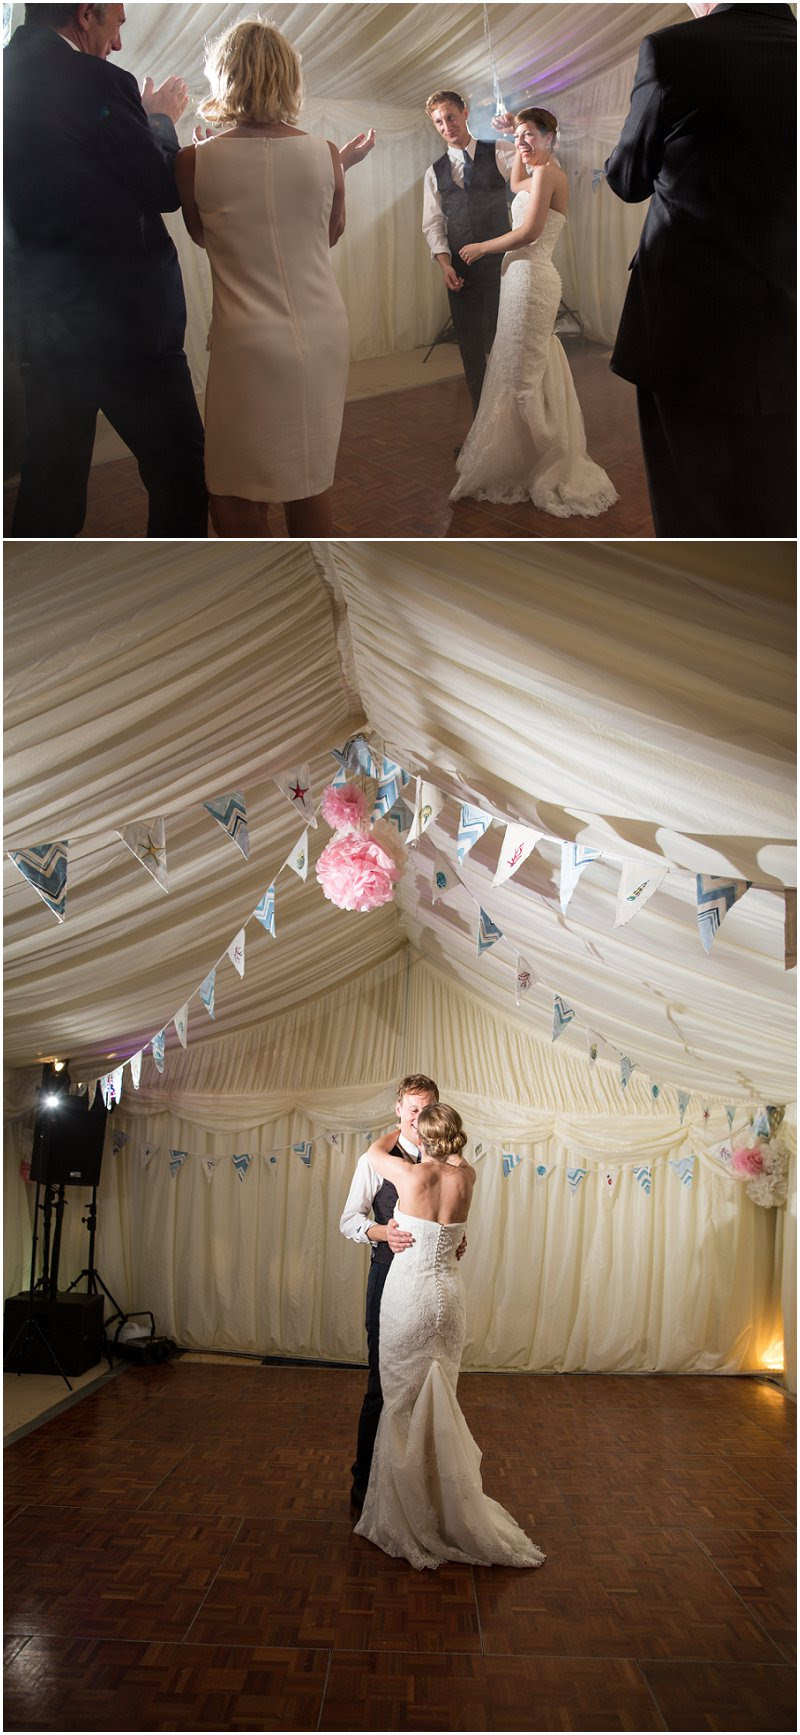 First dance at Anglesey Marquee wedding in Wales